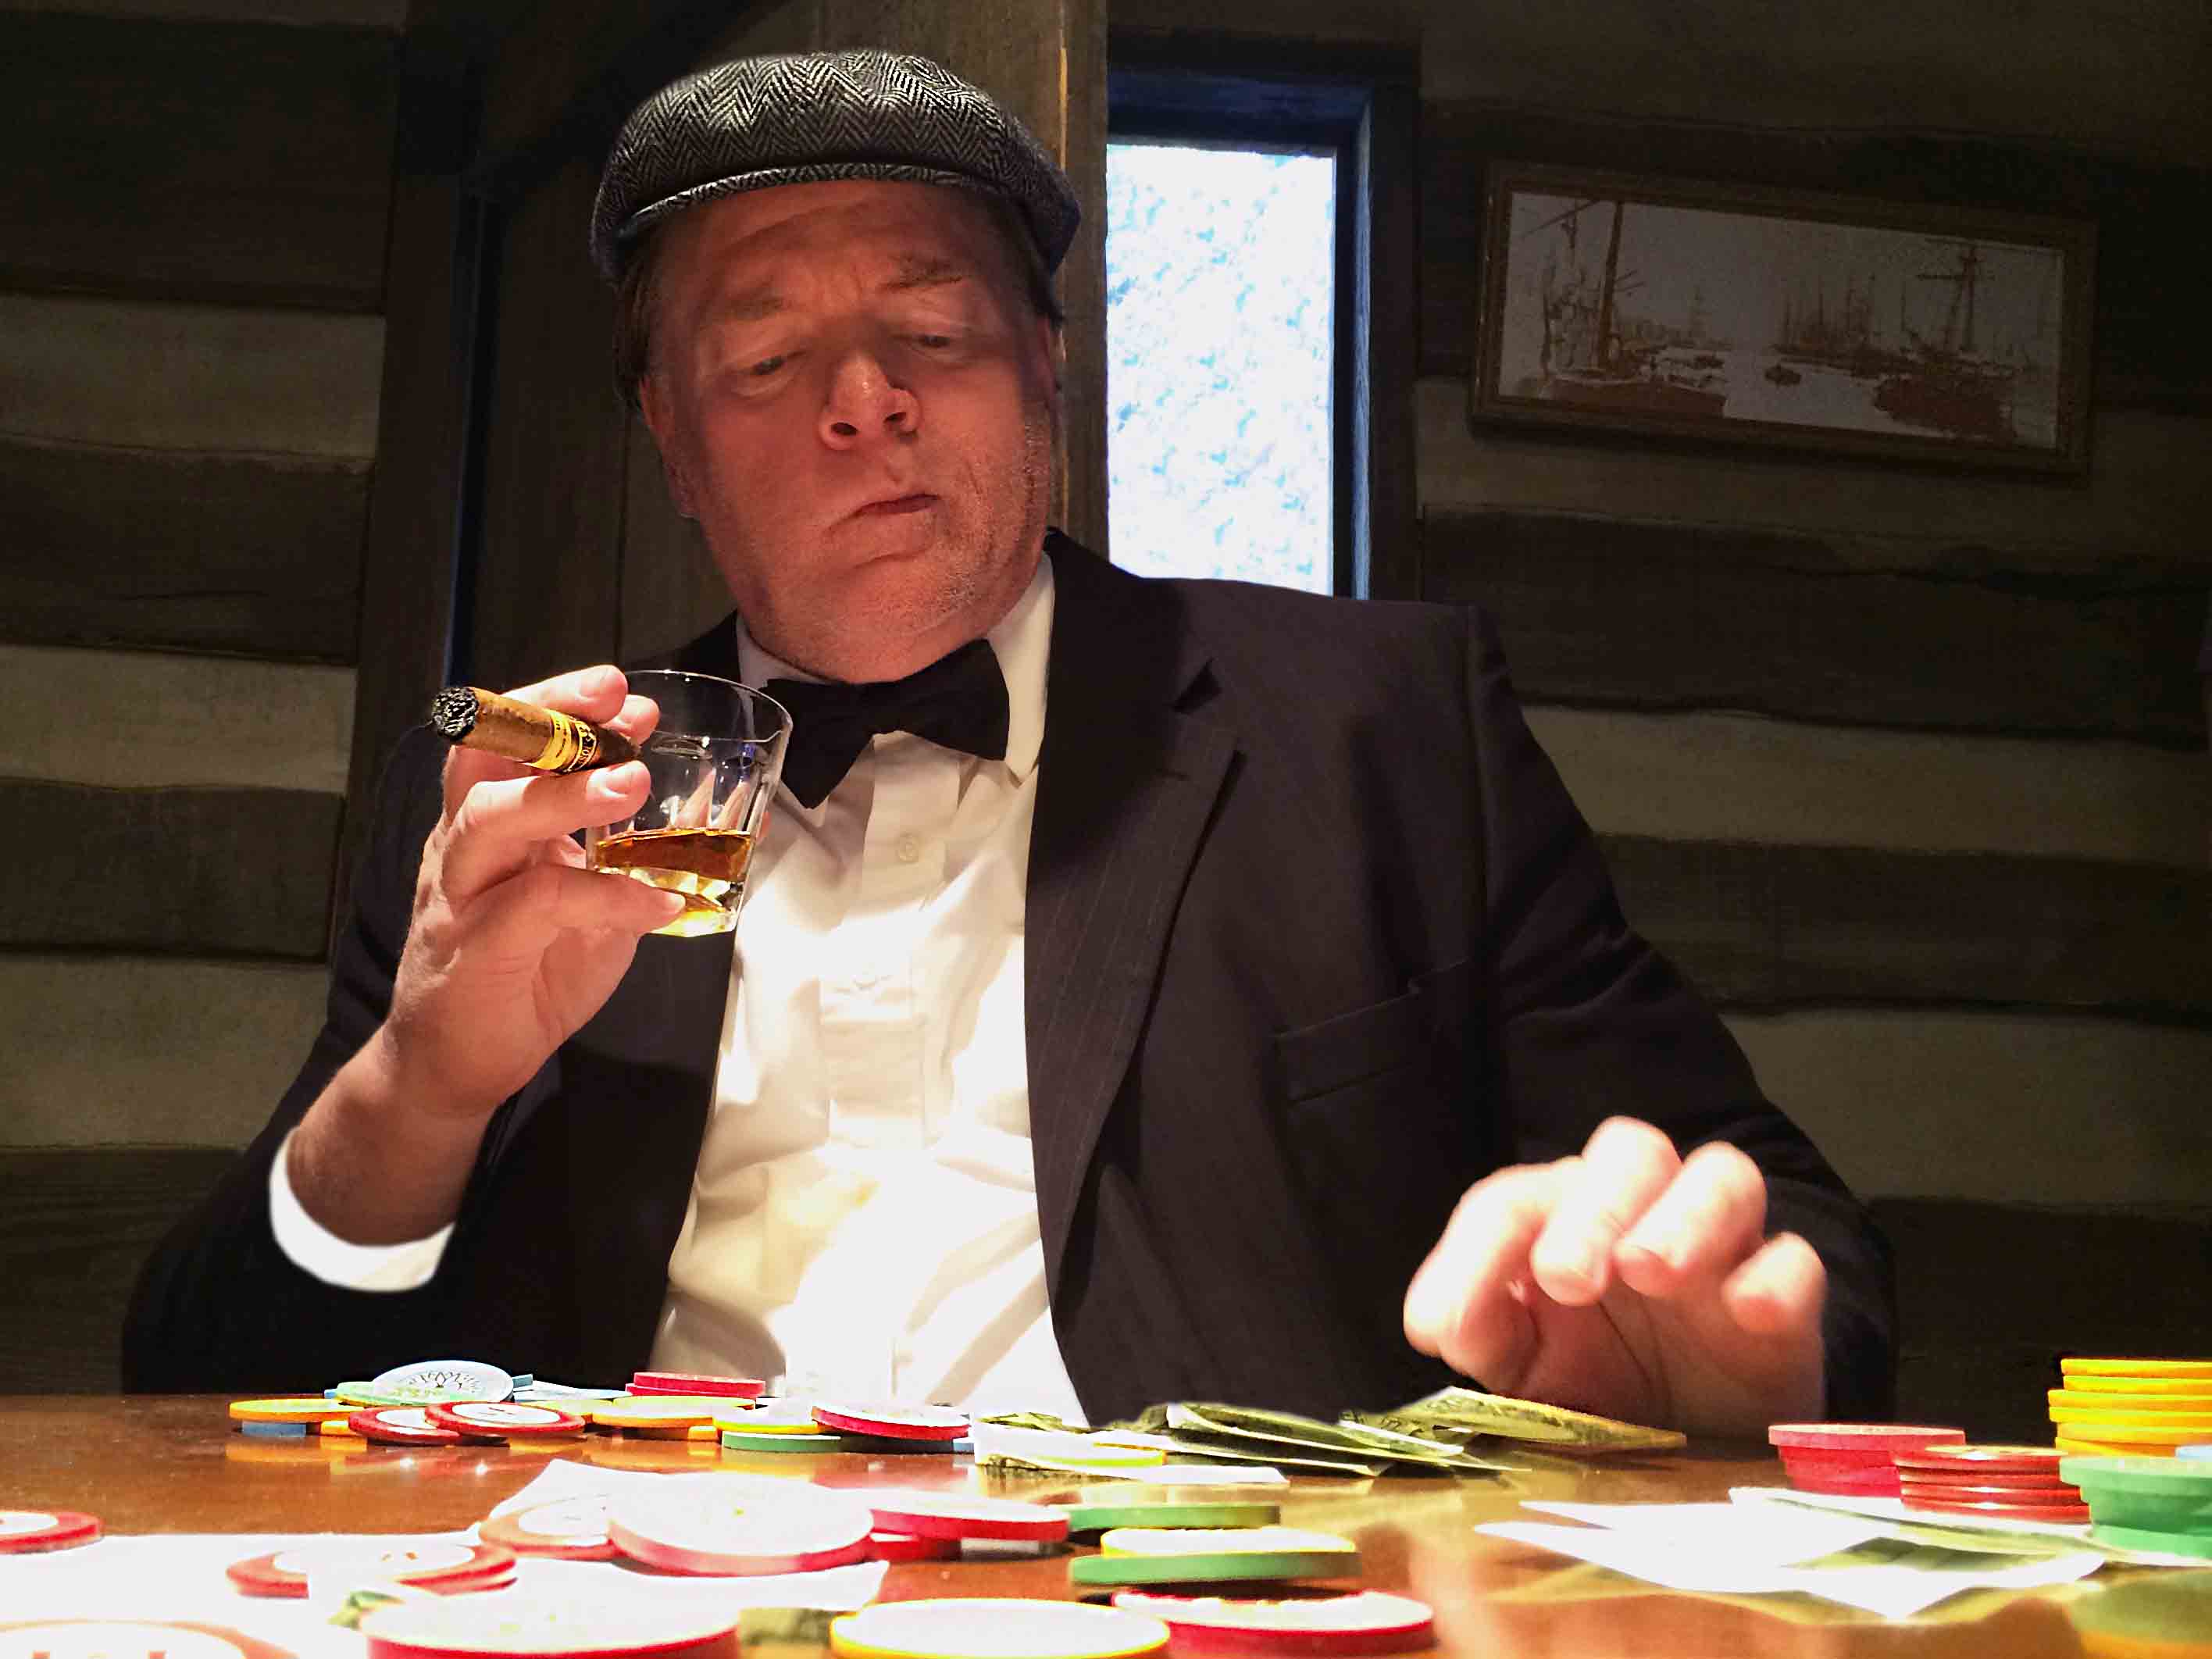 Turn of the century Poker player for The History Channel